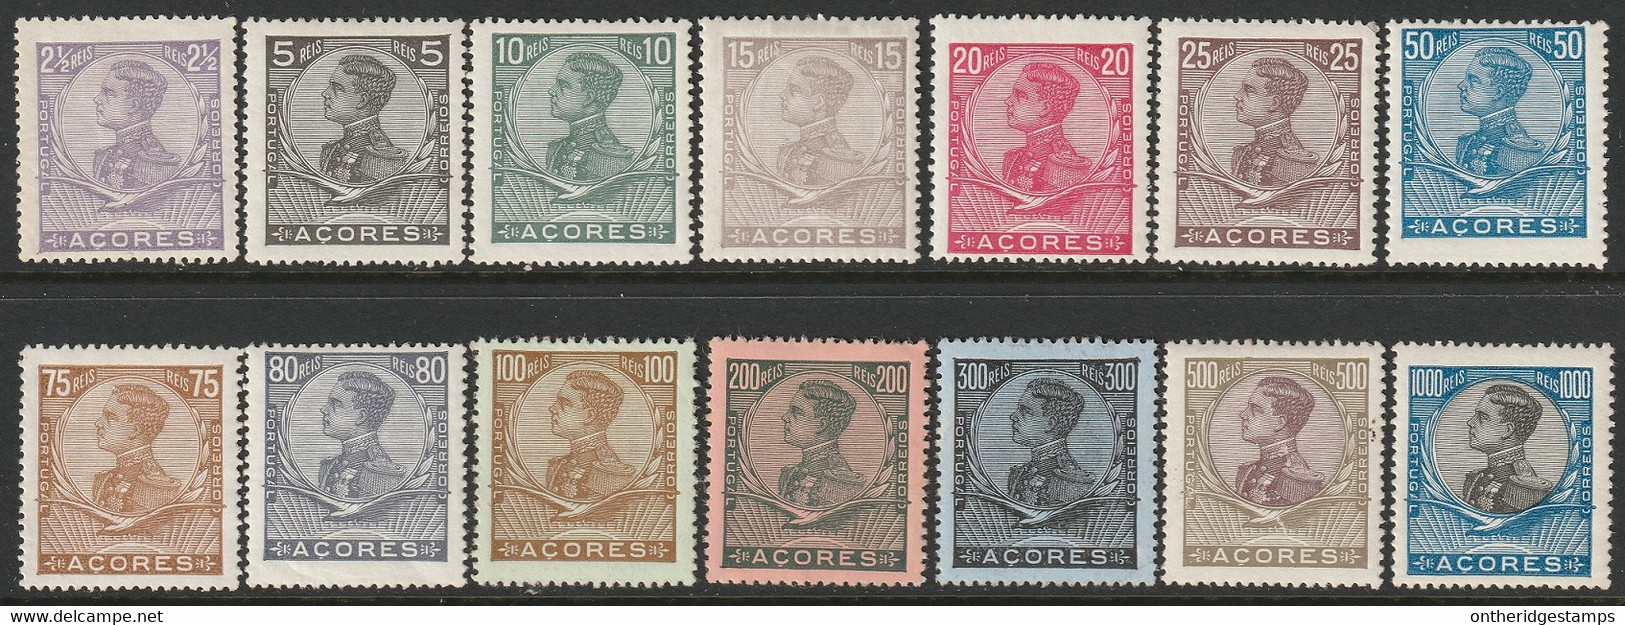 Azores 1910 Sc 112-25 Yt 109-22 Set MLH*/MH* - Azores